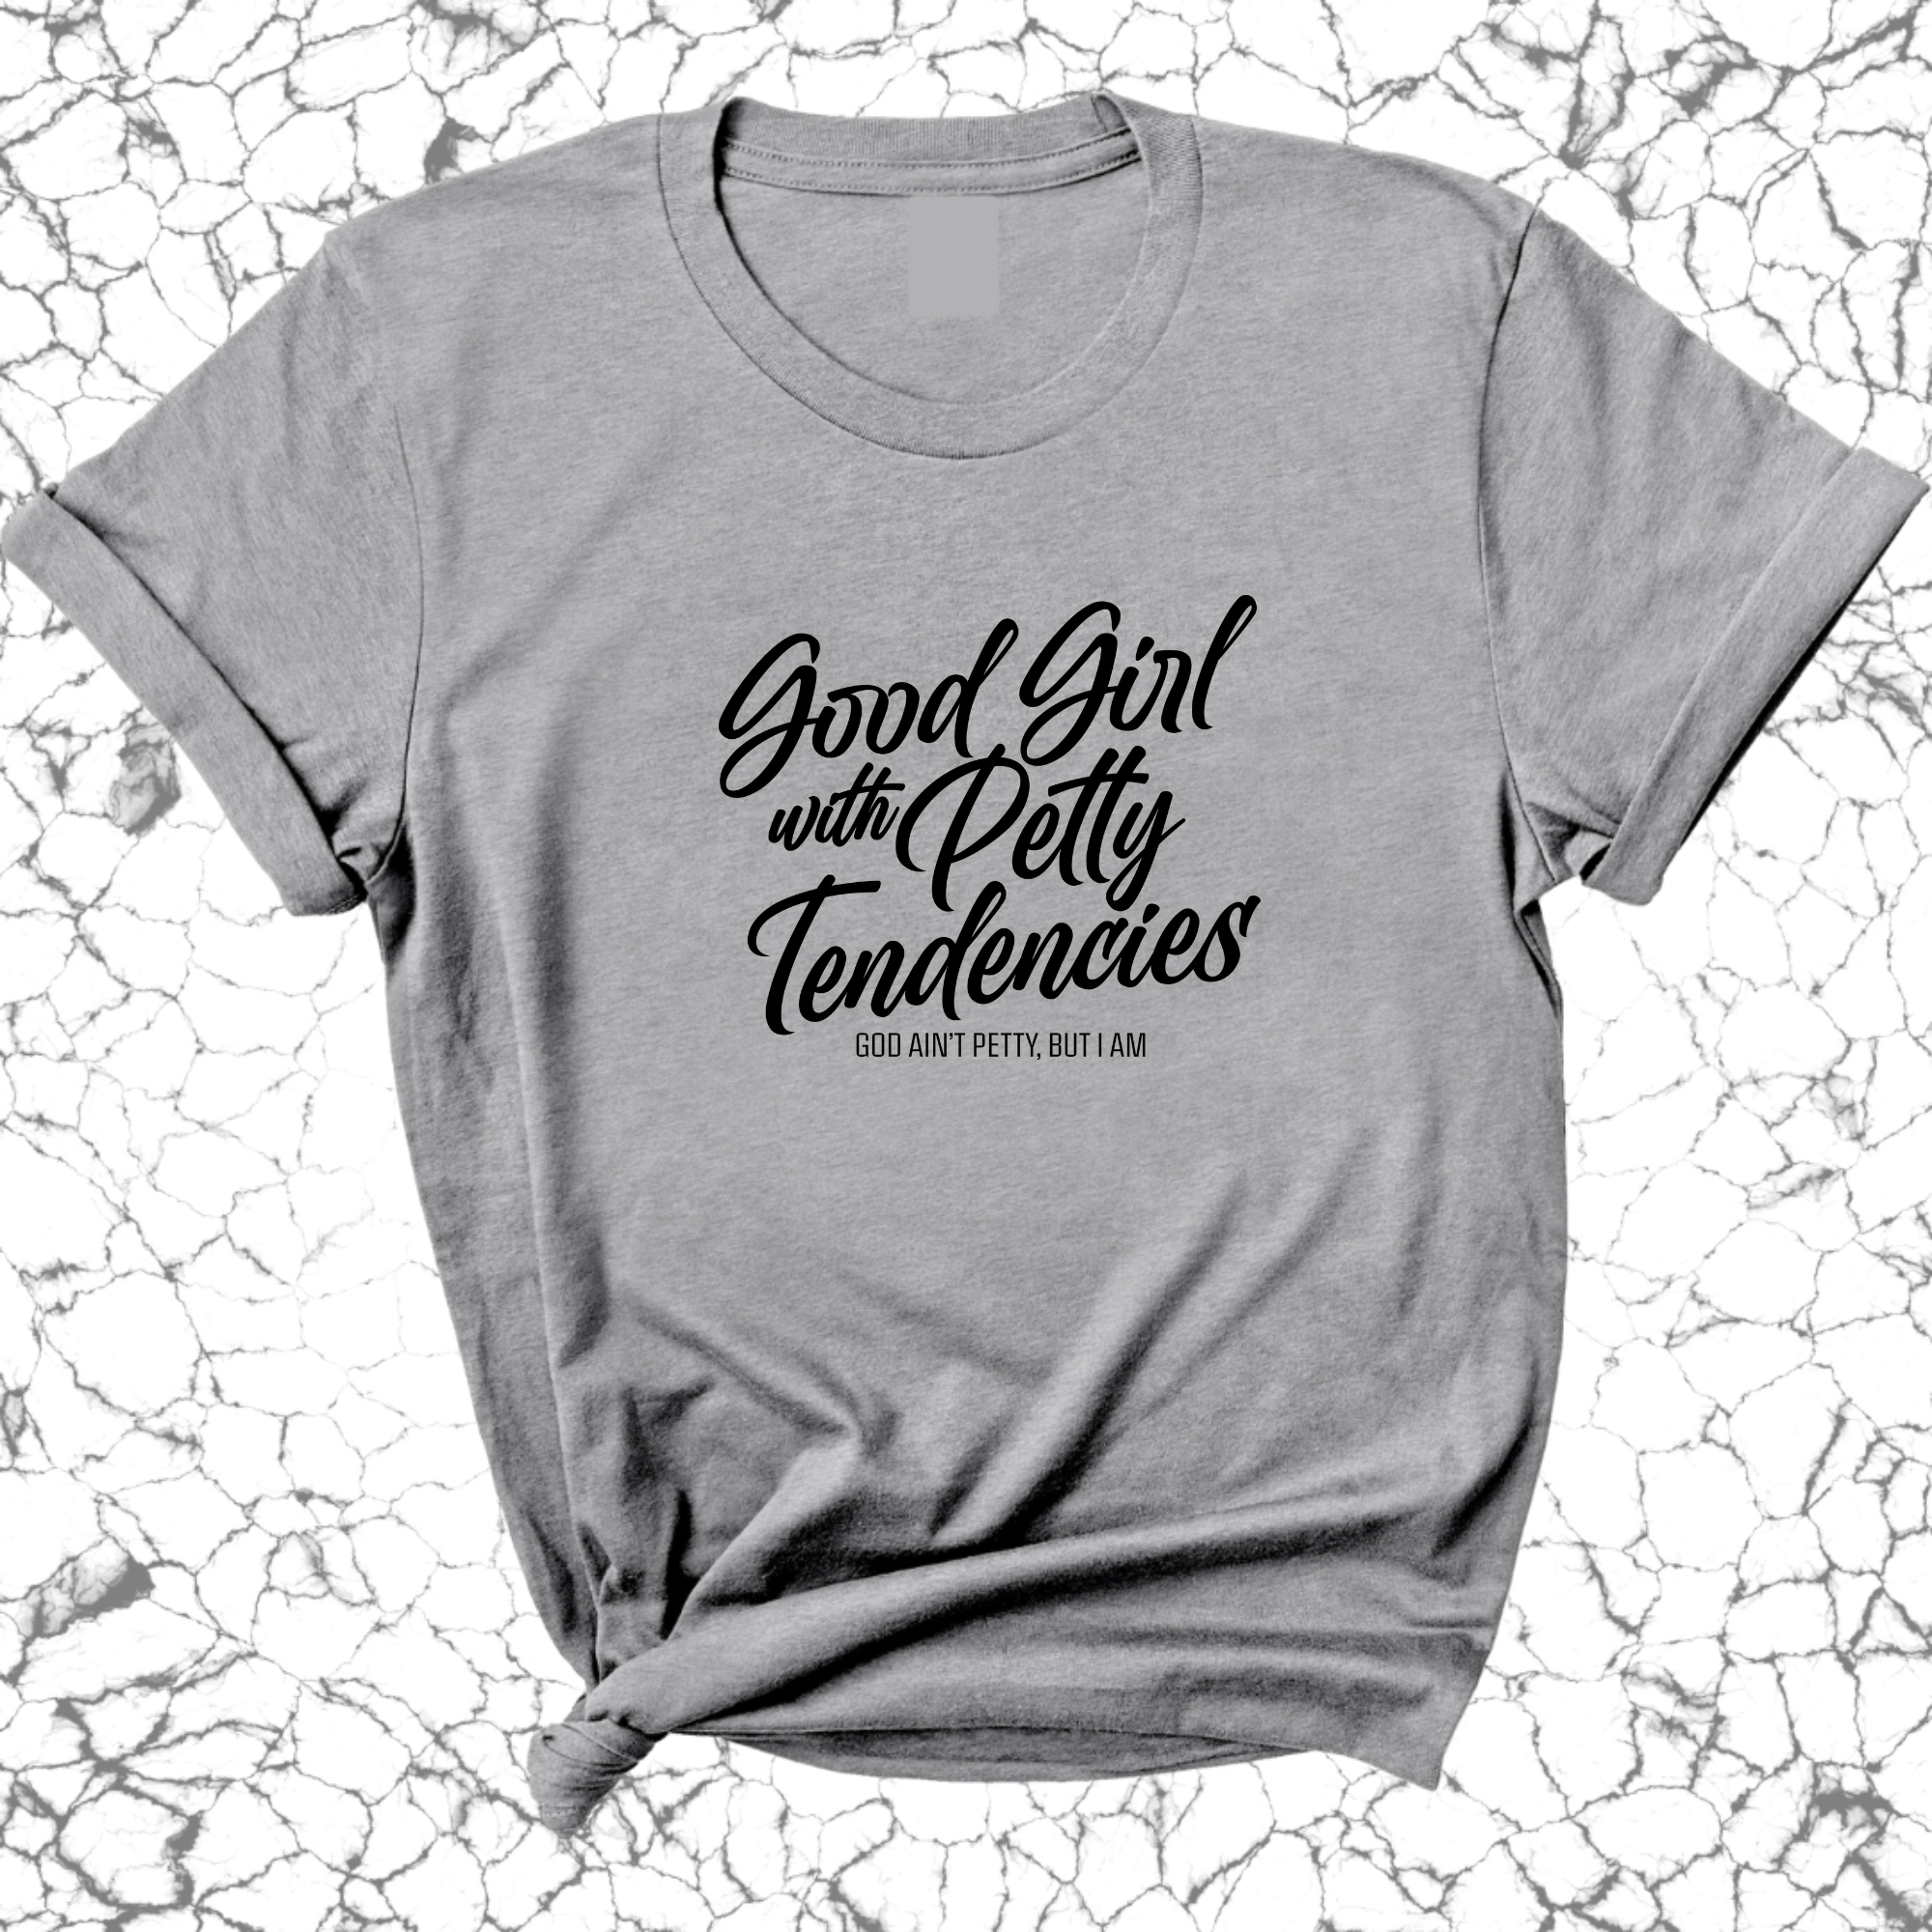 Good Girl with Petty Tendencies Unisex Tee-T-Shirt-The Original God Ain't Petty But I Am